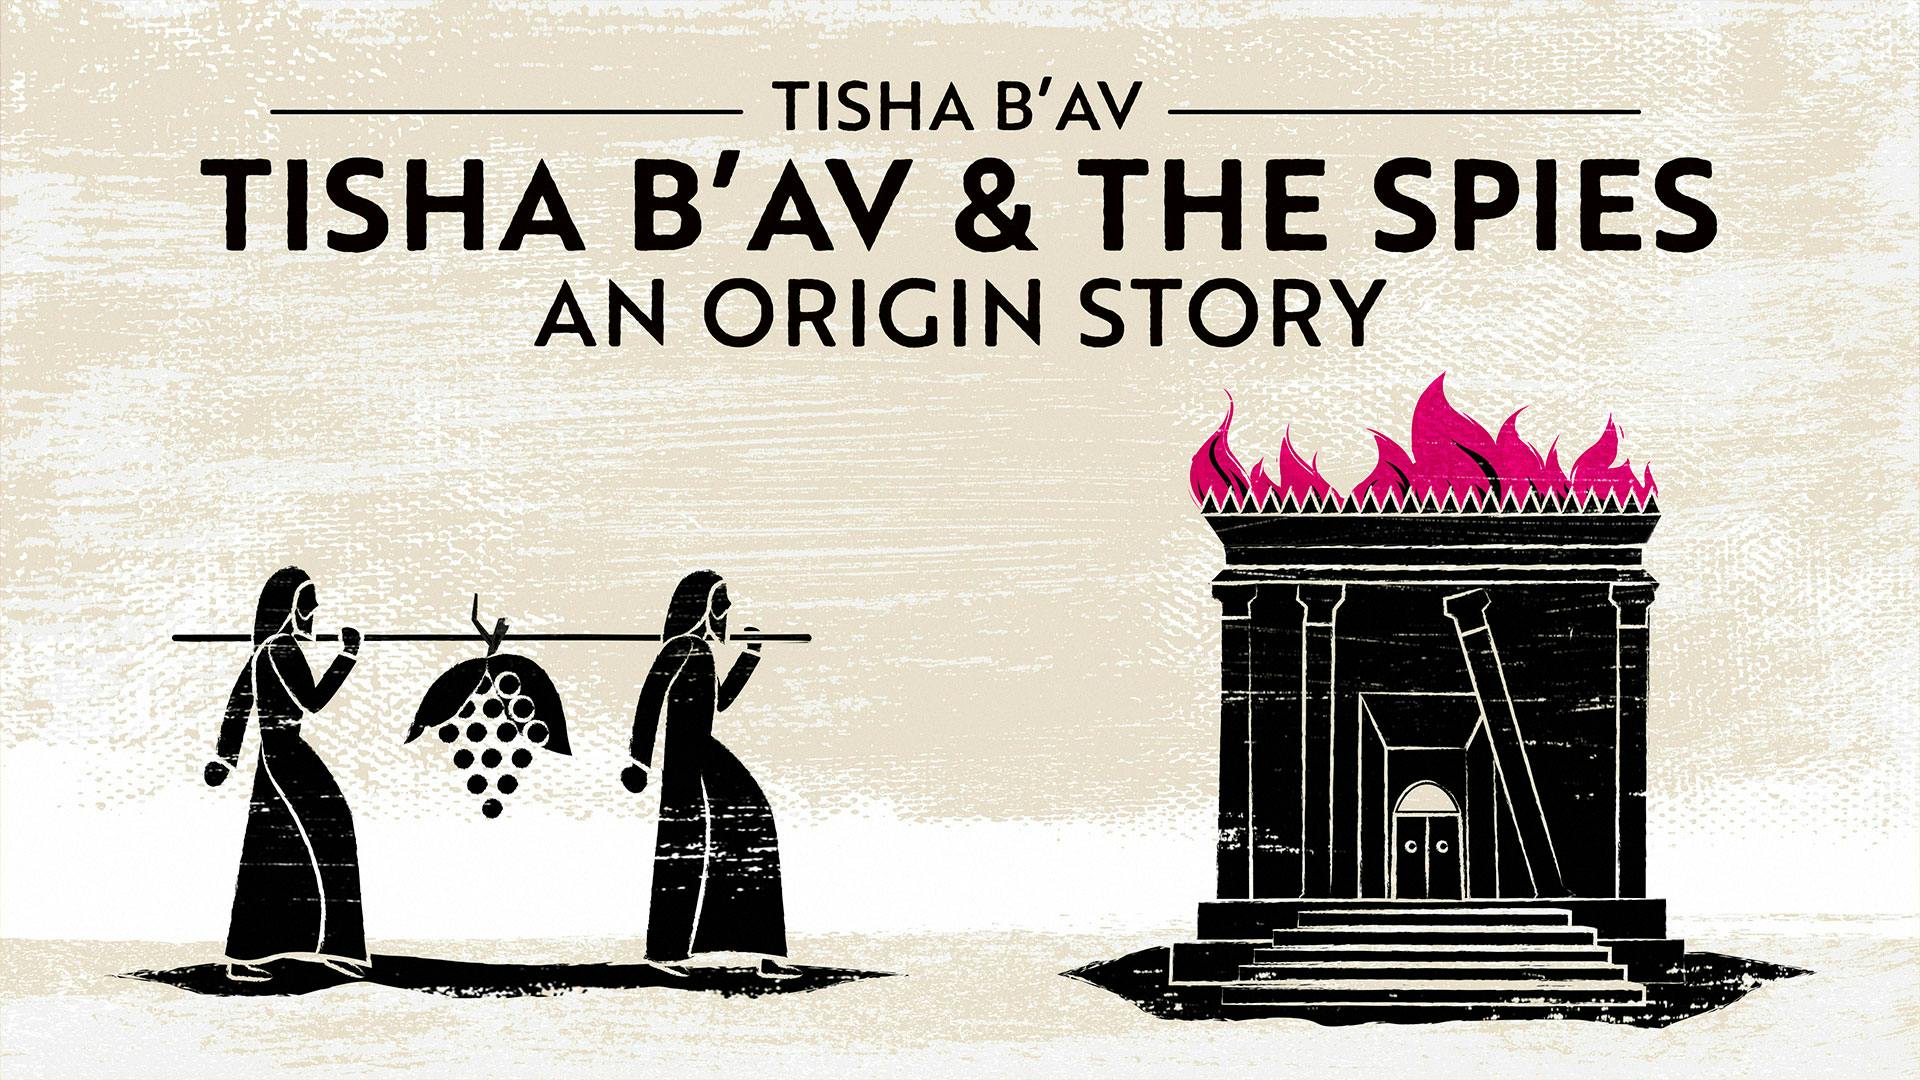 How the Sin of the Spies Led to Tisha B’Av